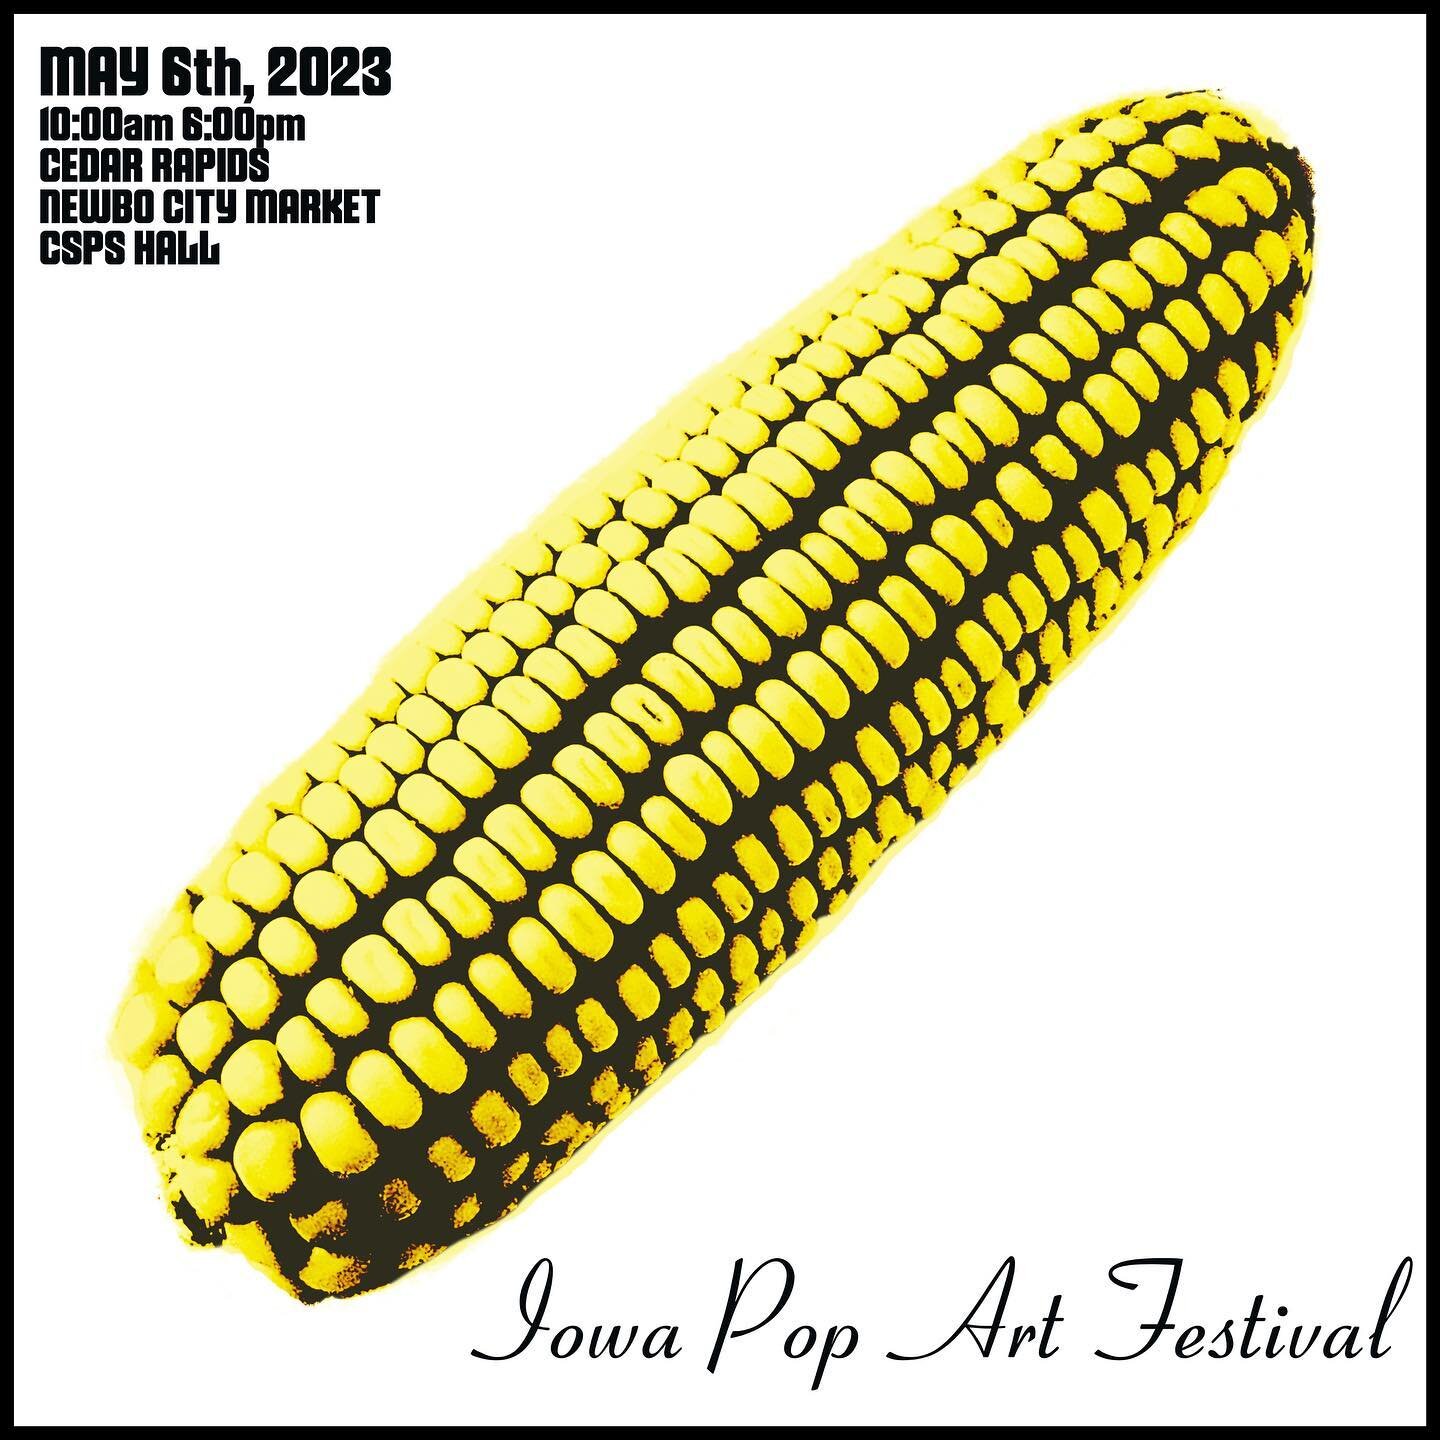 If I haven&rsquo;t made this clear, the Iowa Pop Art Festival 2023 is very personal to me. We have gathered more Iowa artists in one place than you&rsquo;re going to find anywhere else. We added music from acts that are so good you&rsquo;ll be blown 